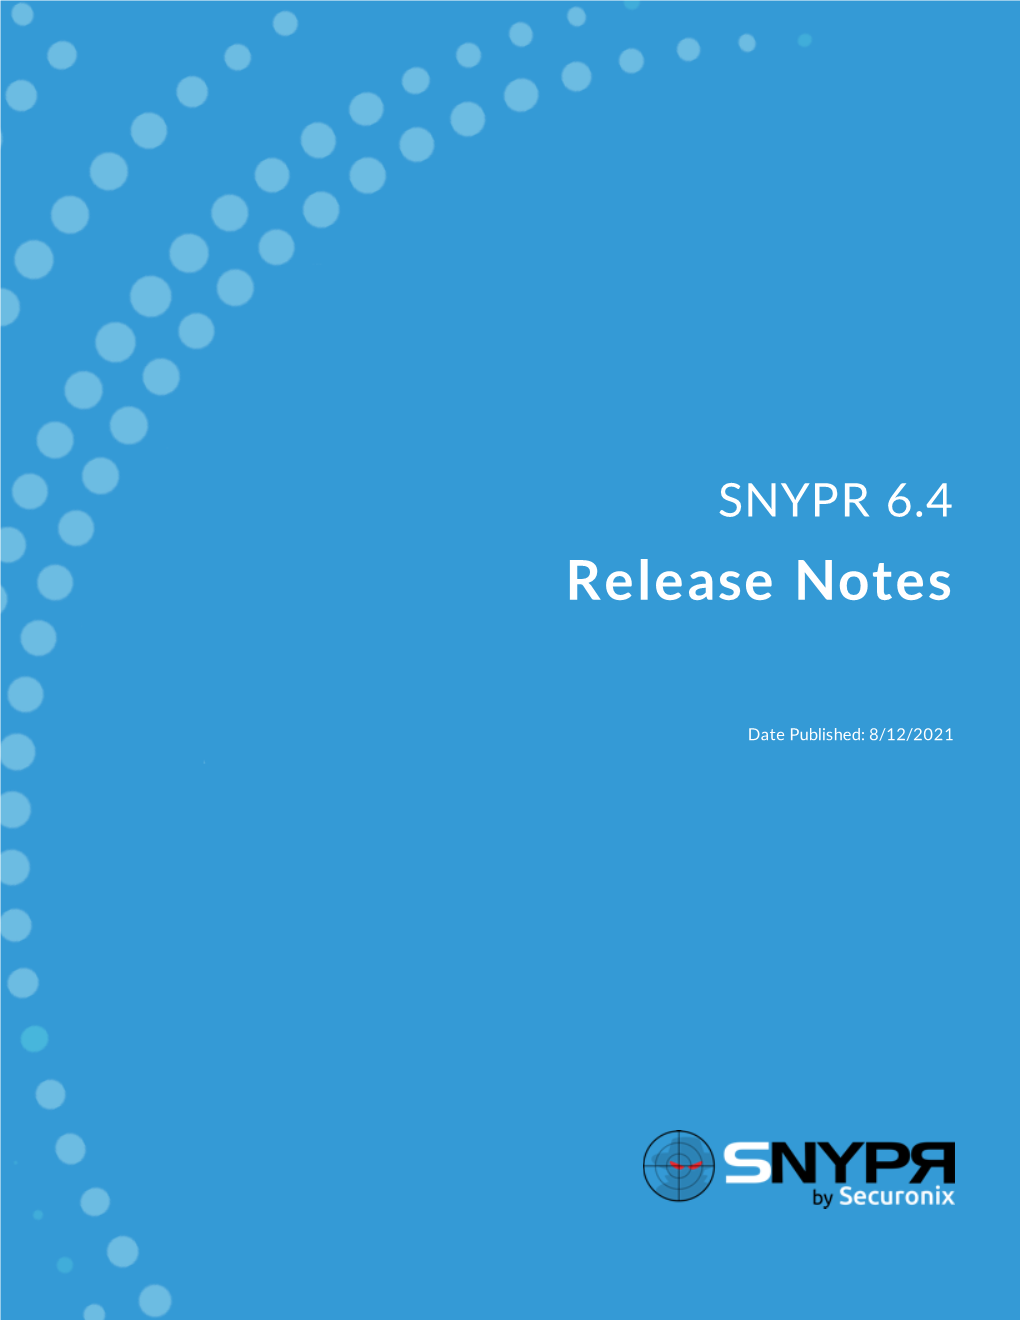 SNYPR 6.4 Release Notes